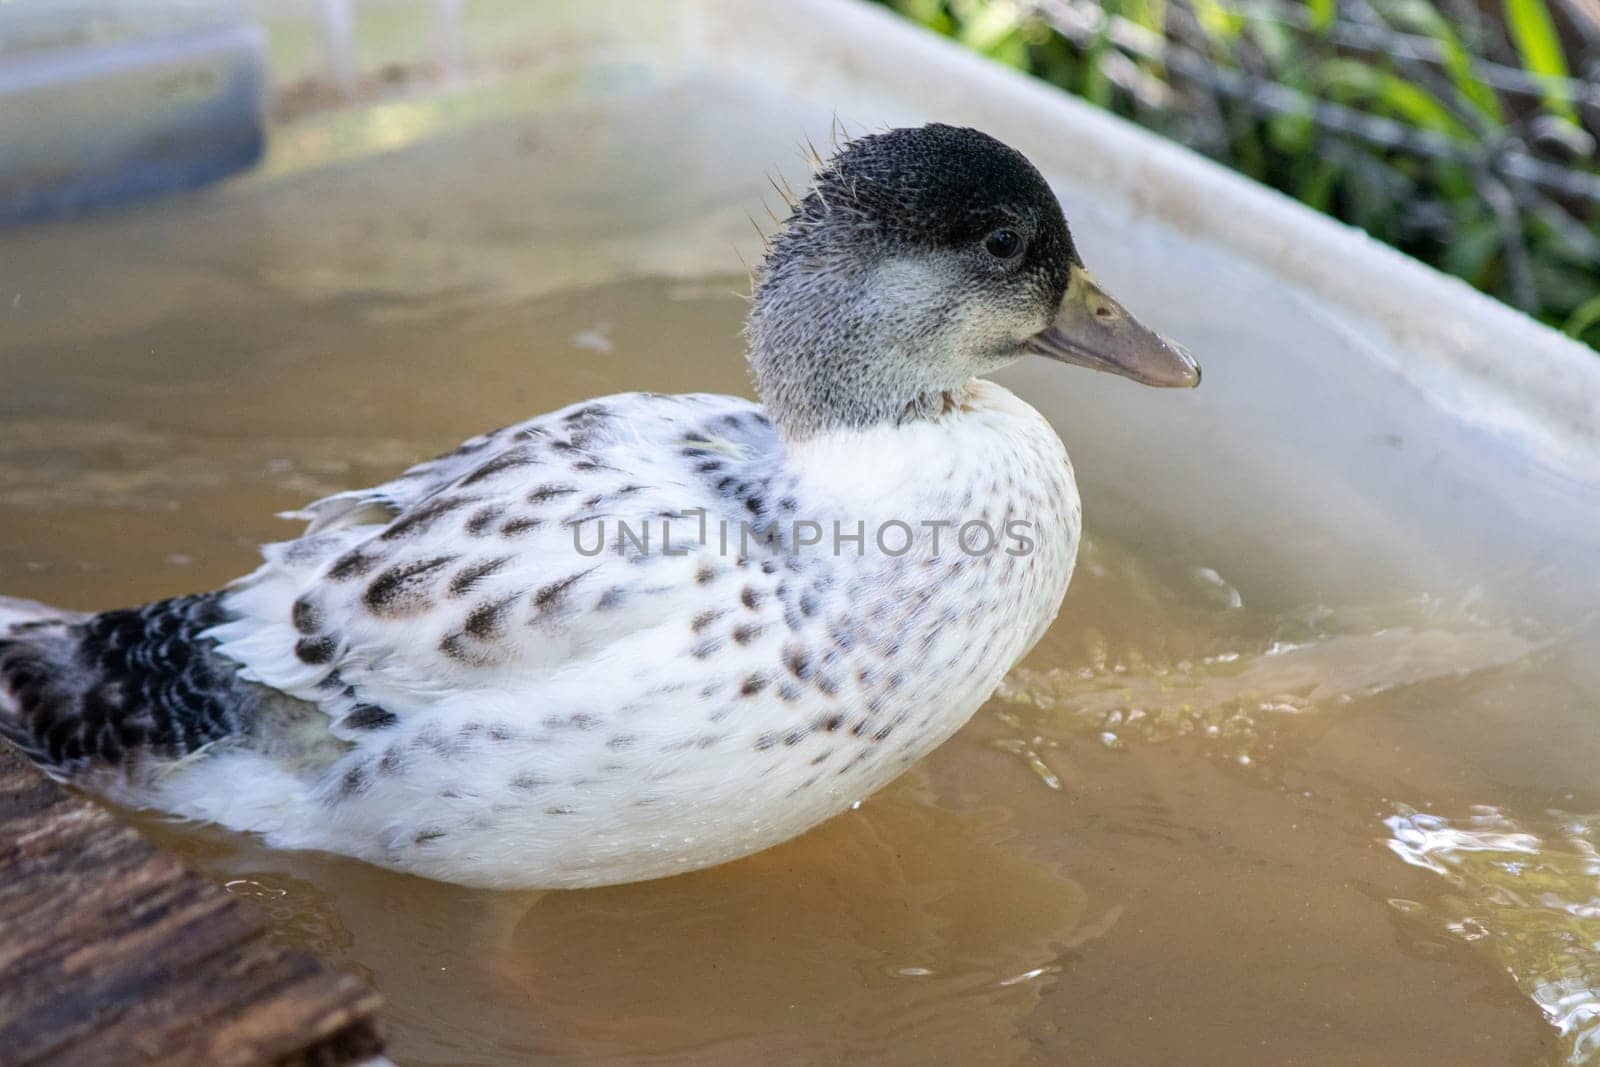 Younger Snowy Calls ducks playing in a tote of water by gena_wells